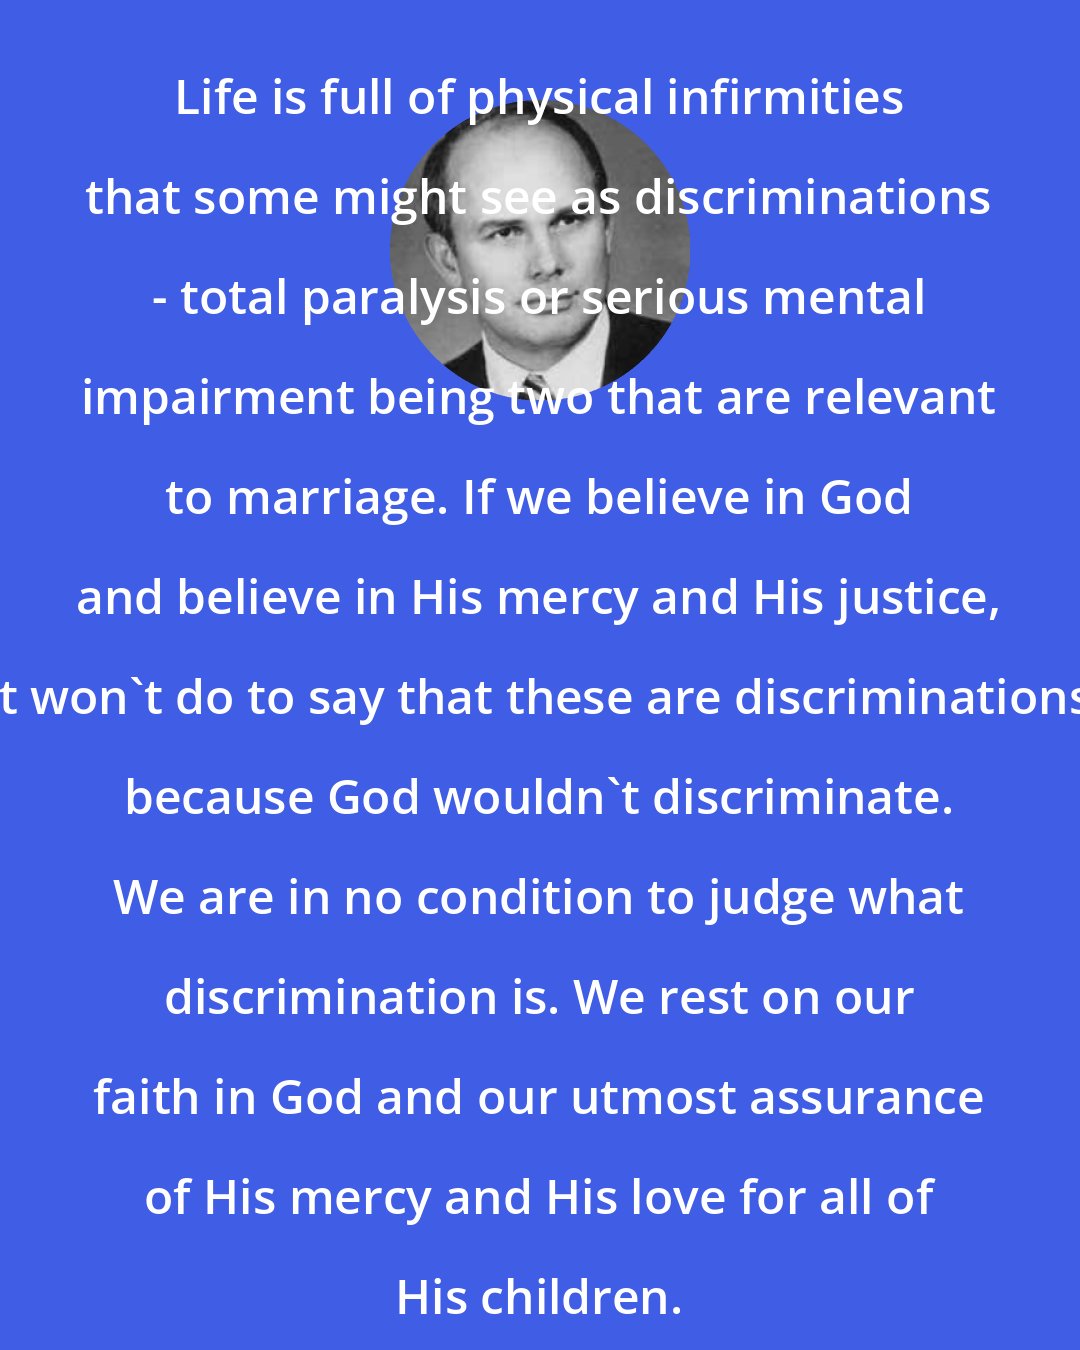 Dallin H. Oaks: Life is full of physical infirmities that some might see as discriminations - total paralysis or serious mental impairment being two that are relevant to marriage. If we believe in God and believe in His mercy and His justice, it won't do to say that these are discriminations because God wouldn't discriminate. We are in no condition to judge what discrimination is. We rest on our faith in God and our utmost assurance of His mercy and His love for all of His children.